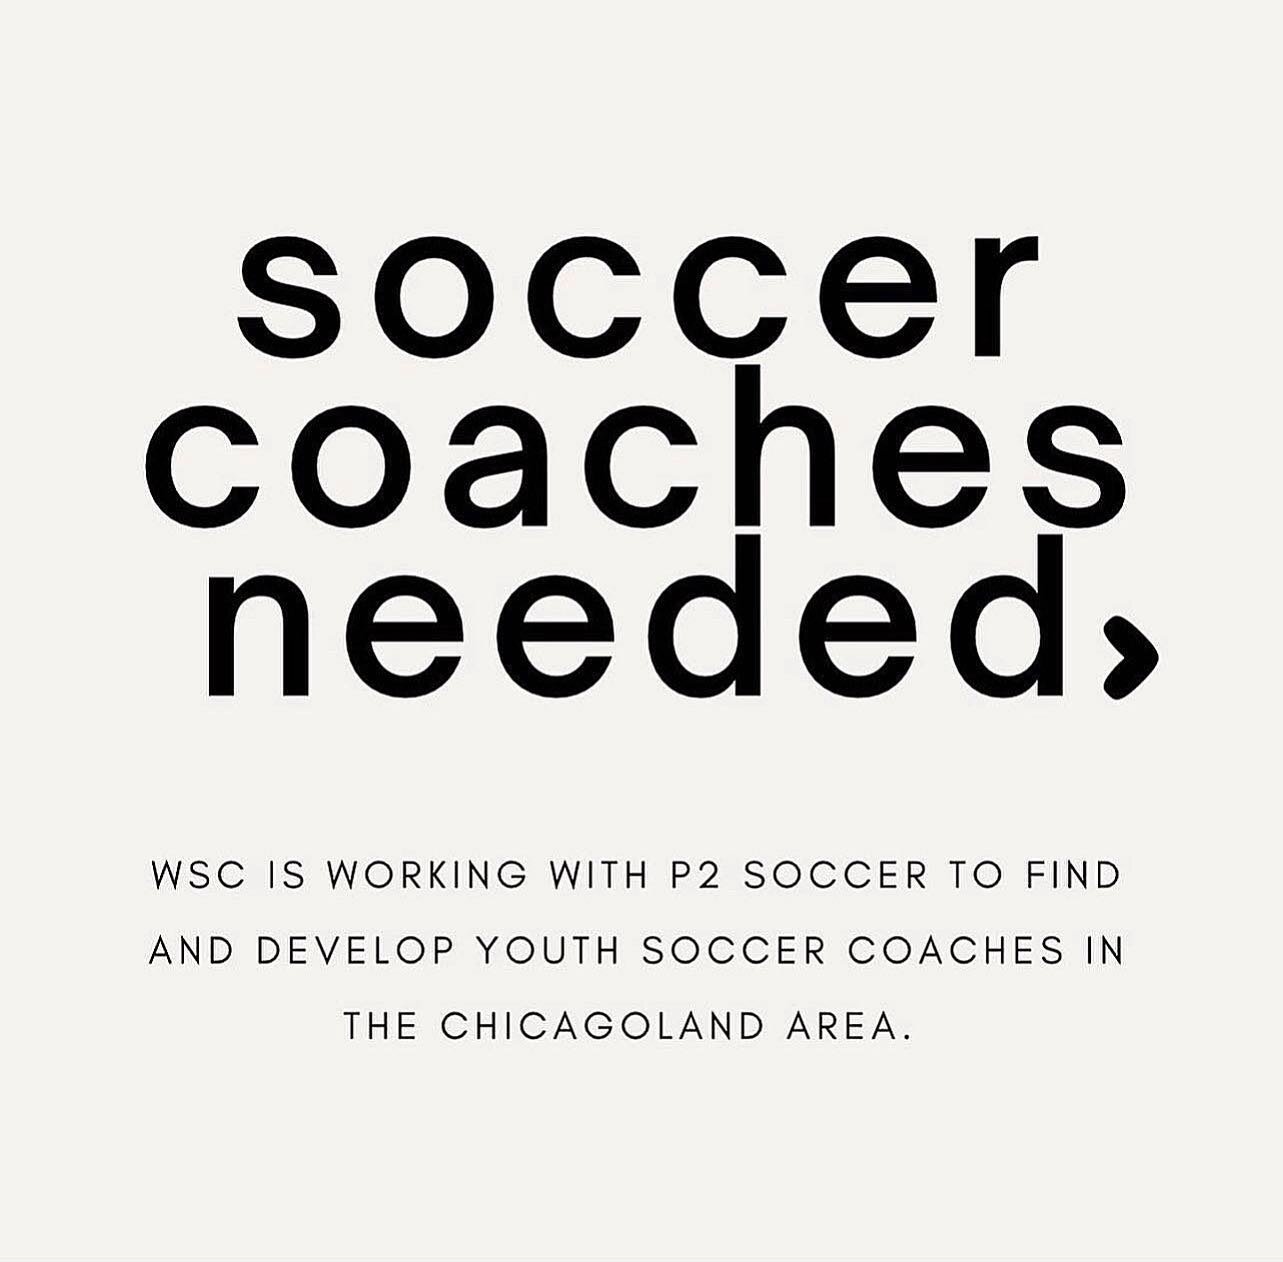 WSC is working with @p2soccer again to find and develop youth soccer coaches in the Chicagoland area. 

We're trying to create a pathway for any soccer-loving individual to become a confident and competent youth coach who wants to help cultivate the 